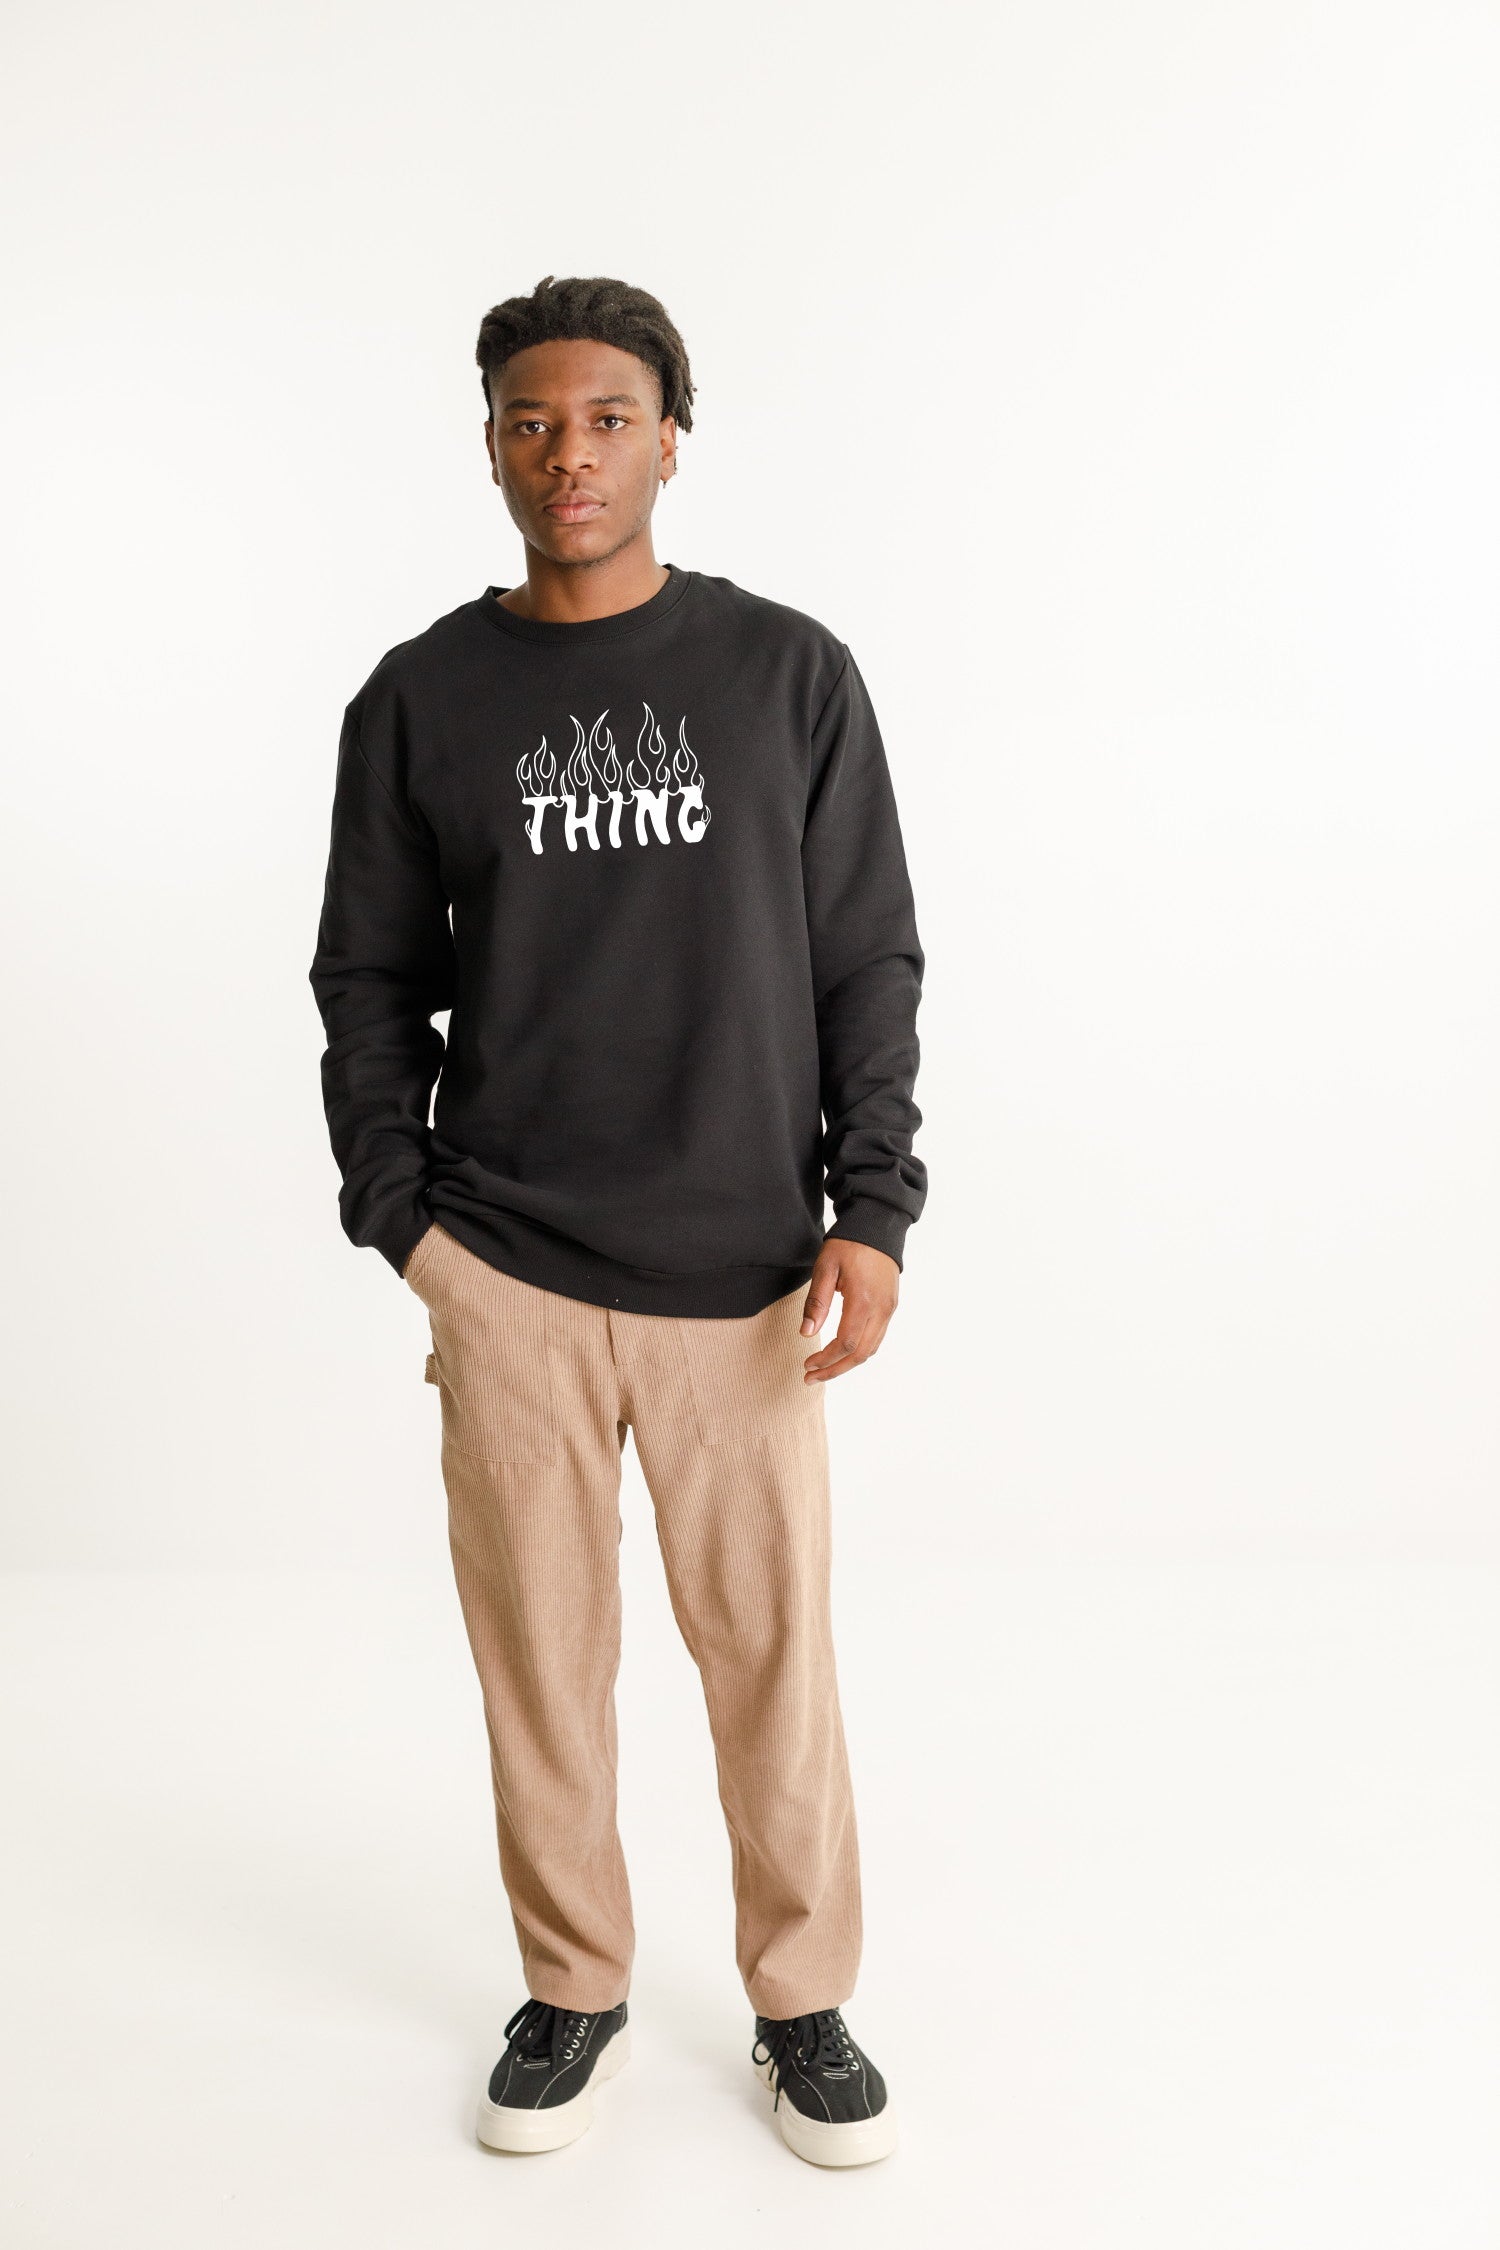 Title Crew - Sale - Black with White Pyro Embroidery